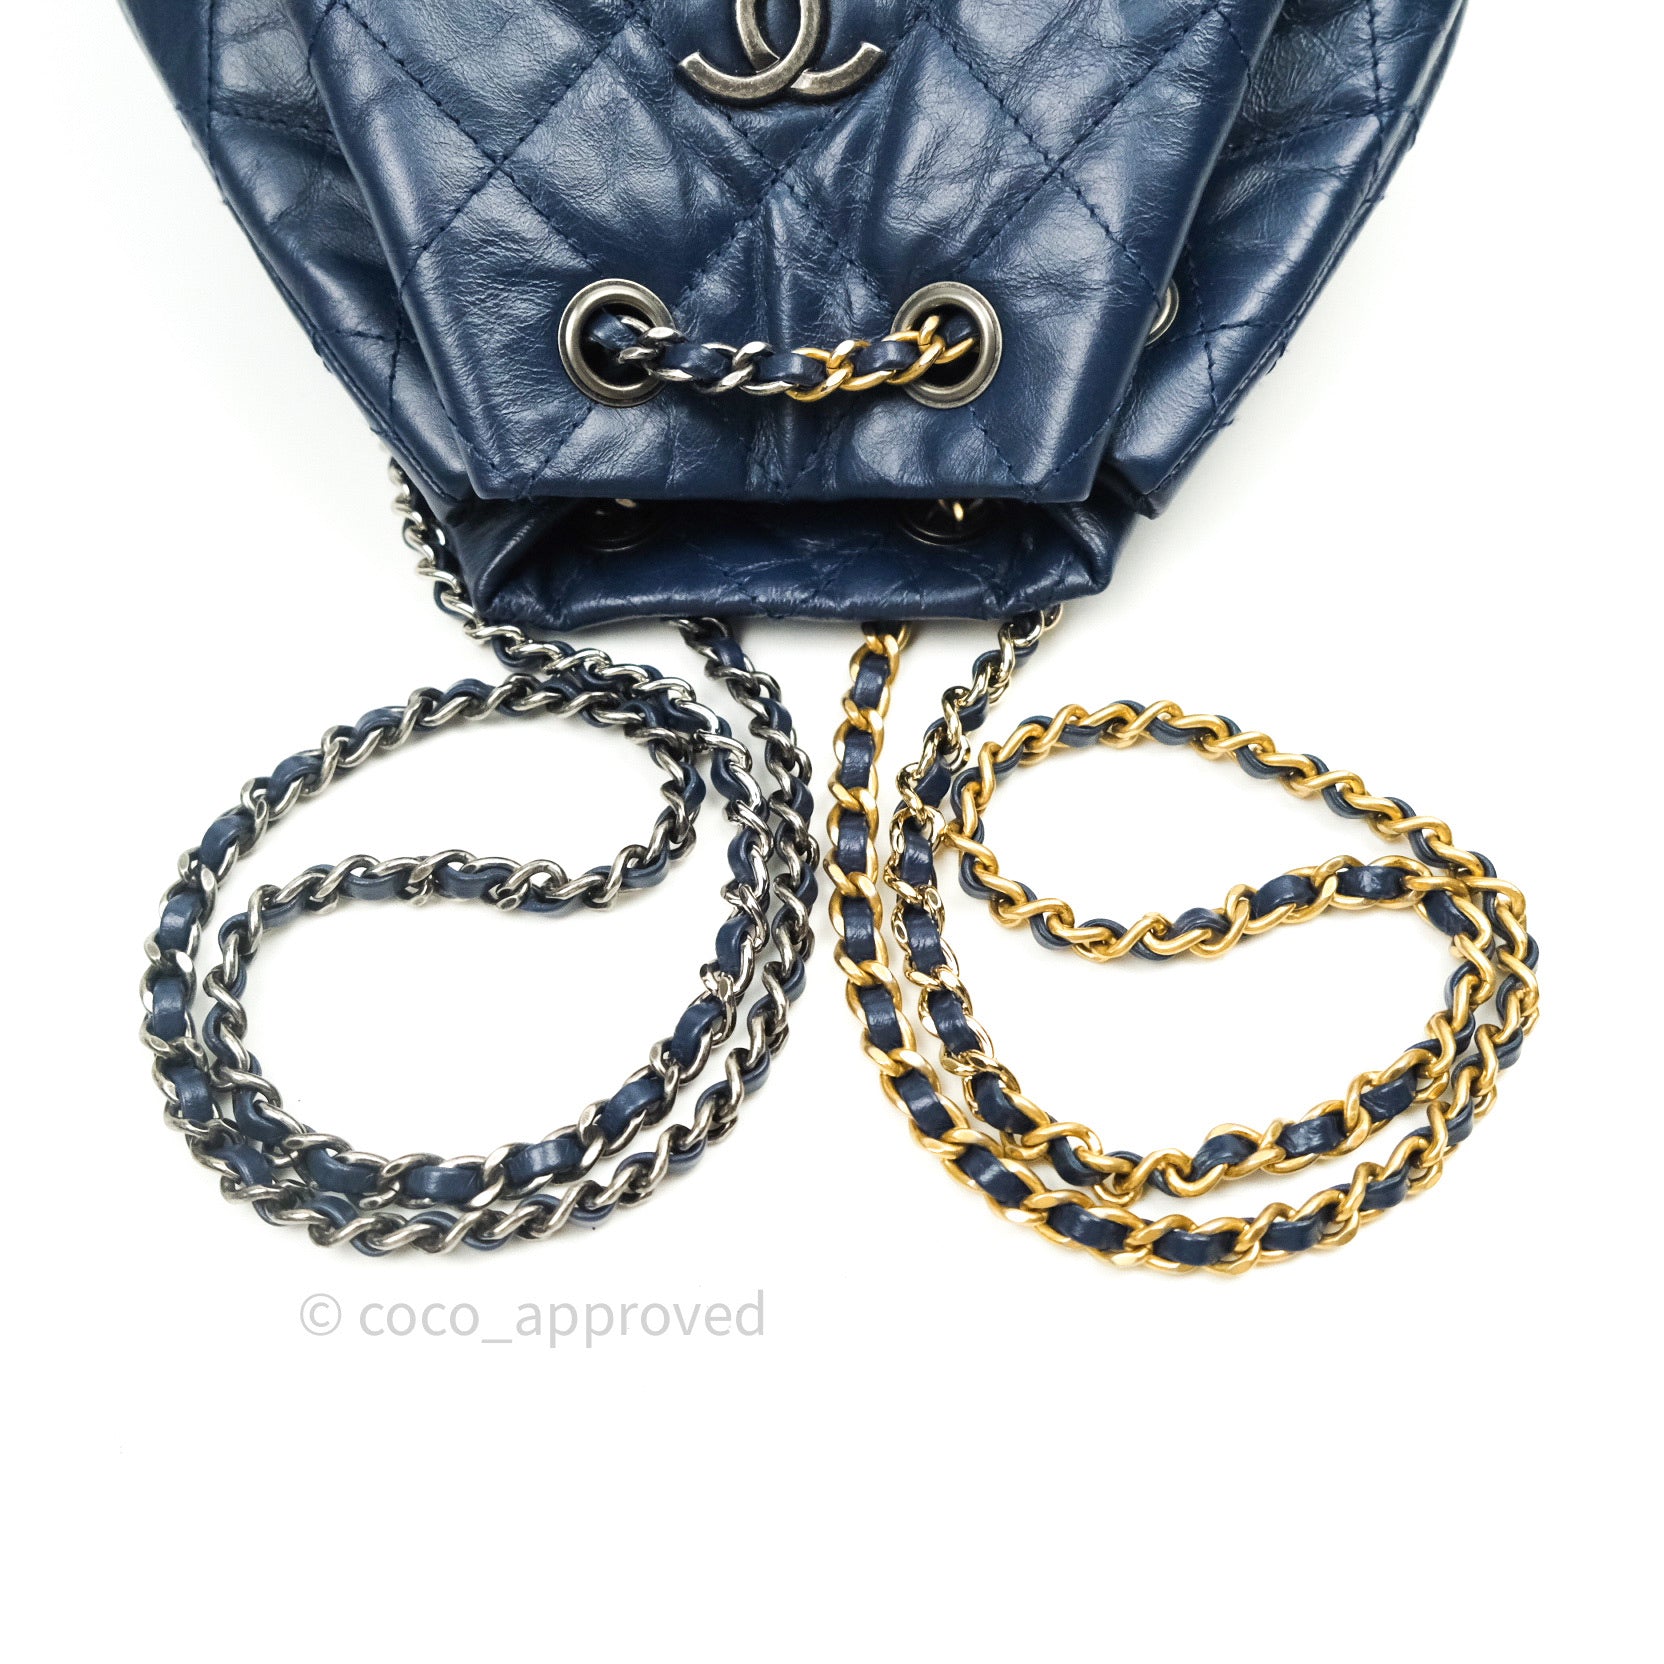 Chanel Gabrielle Backpack Black Aged Calfskin Small Navy Black